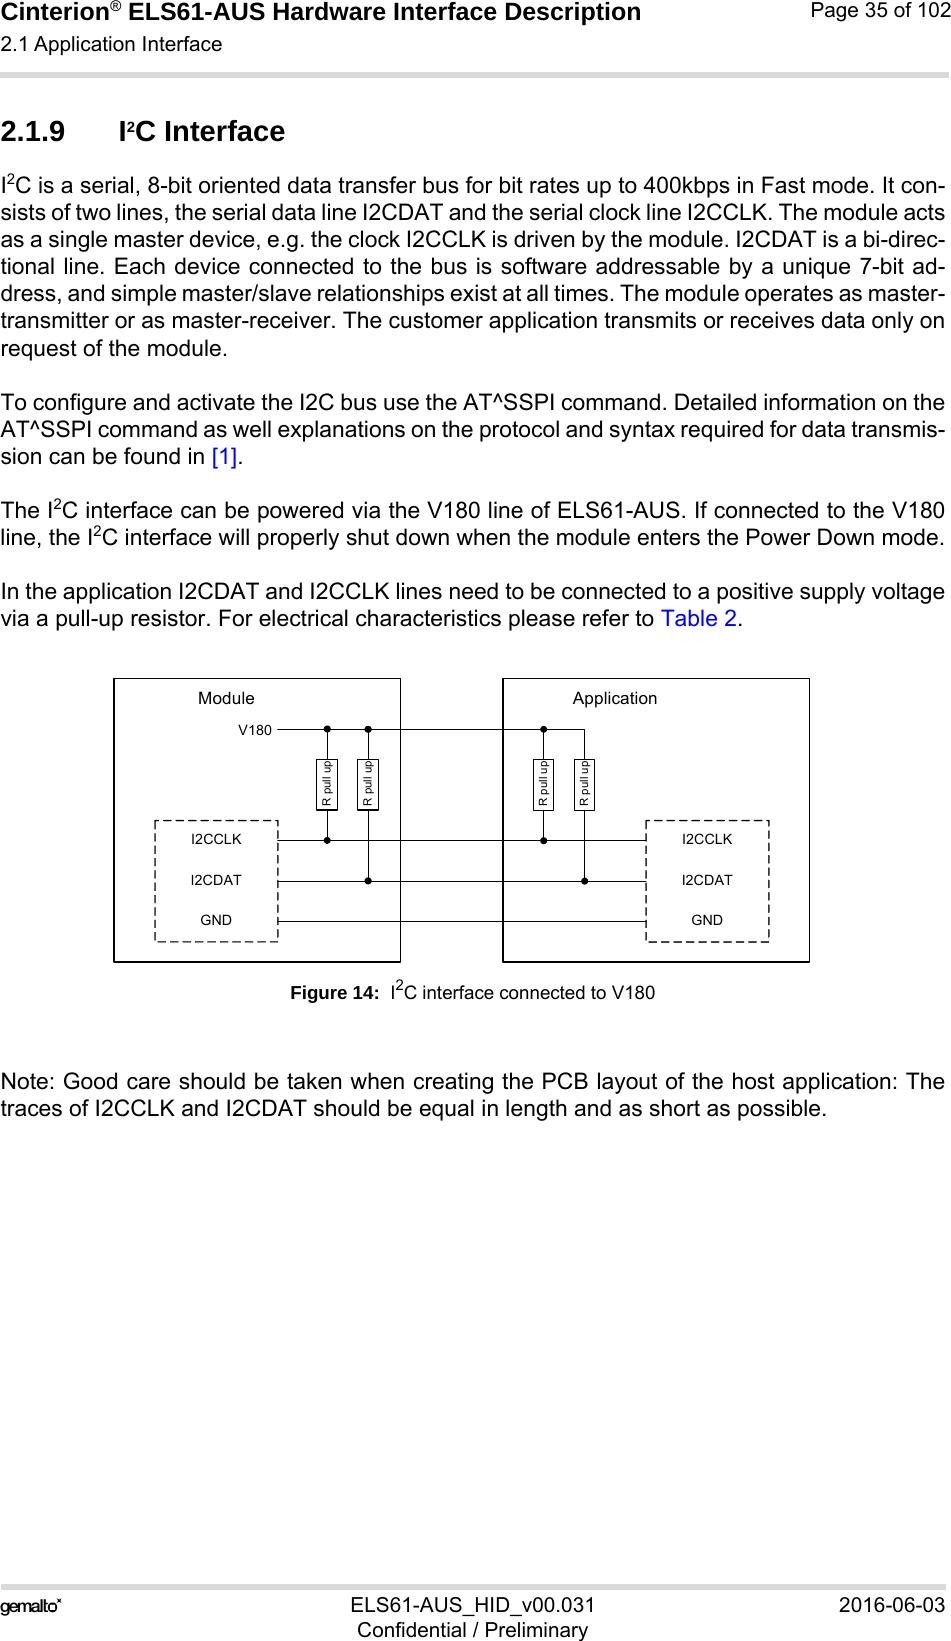 Cinterion® ELS61-AUS Hardware Interface Description2.1 Application Interface52ELS61-AUS_HID_v00.031 2016-06-03Confidential / PreliminaryPage 35 of 1022.1.9 I2C InterfaceI2C is a serial, 8-bit oriented data transfer bus for bit rates up to 400kbps in Fast mode. It con-sists of two lines, the serial data line I2CDAT and the serial clock line I2CCLK. The module actsas a single master device, e.g. the clock I2CCLK is driven by the module. I2CDAT is a bi-direc-tional line. Each device connected to the bus is software addressable by a unique 7-bit ad-dress, and simple master/slave relationships exist at all times. The module operates as master-transmitter or as master-receiver. The customer application transmits or receives data only onrequest of the module.To configure and activate the I2C bus use the AT^SSPI command. Detailed information on theAT^SSPI command as well explanations on the protocol and syntax required for data transmis-sion can be found in [1].The I2C interface can be powered via the V180 line of ELS61-AUS. If connected to the V180line, the I2C interface will properly shut down when the module enters the Power Down mode.In the application I2CDAT and I2CCLK lines need to be connected to a positive supply voltagevia a pull-up resistor. For electrical characteristics please refer to Table 2.Figure 14:  I2C interface connected to V180Note: Good care should be taken when creating the PCB layout of the host application: Thetraces of I2CCLK and I2CDAT should be equal in length and as short as possible.I2CCLKI2CDATGNDI2CCLKI2CDATGNDModule ApplicationV180R pull upR pull upR pull upR pull up